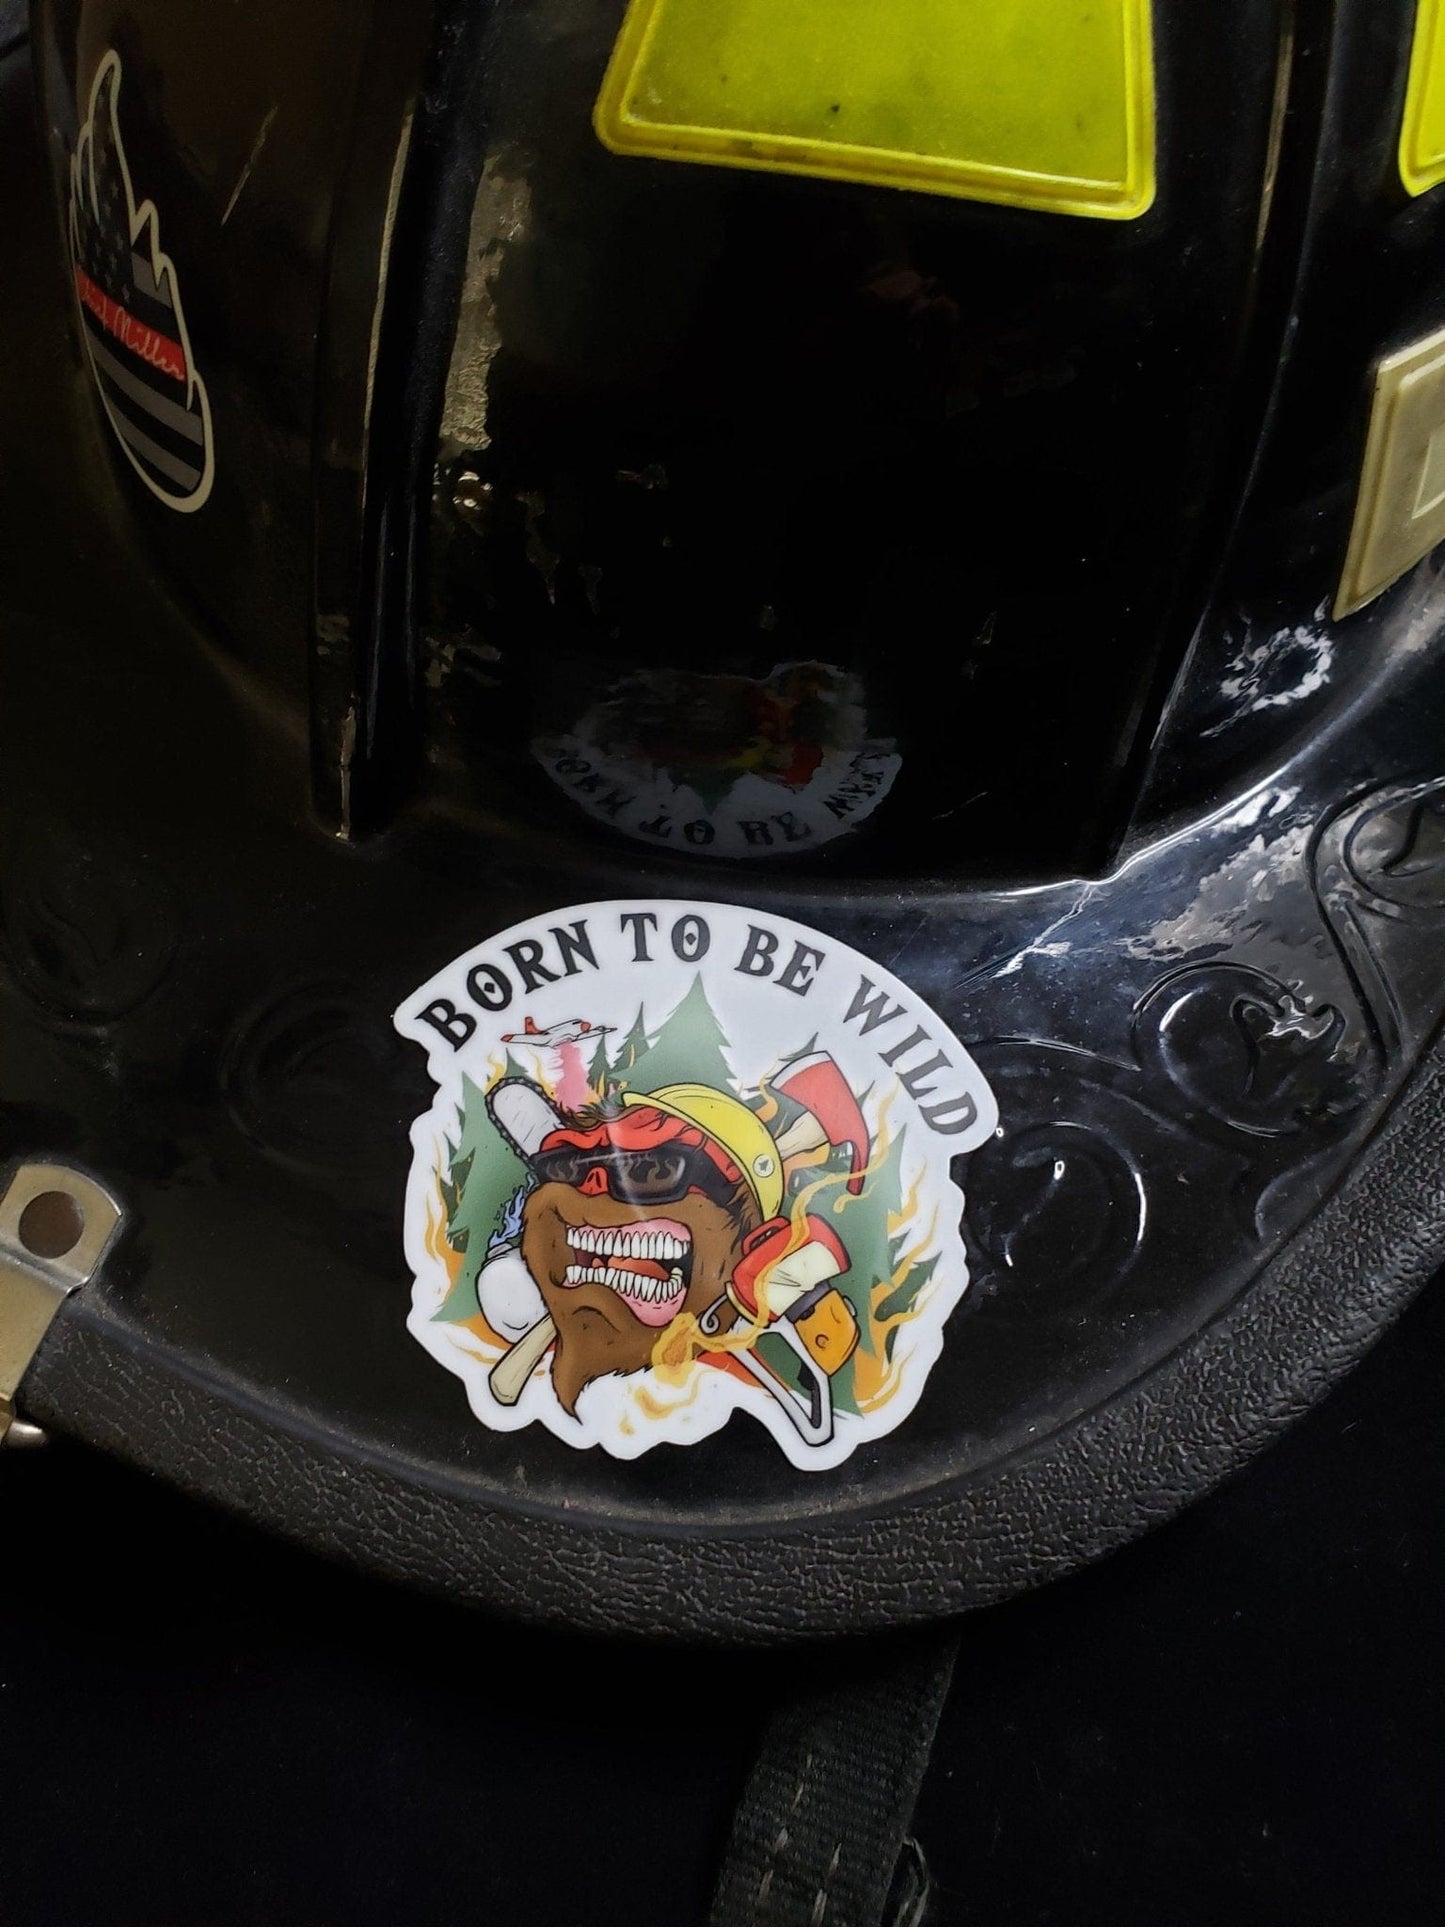 Chief Miller Born To Be Wild -  Helmet Decal Apparel